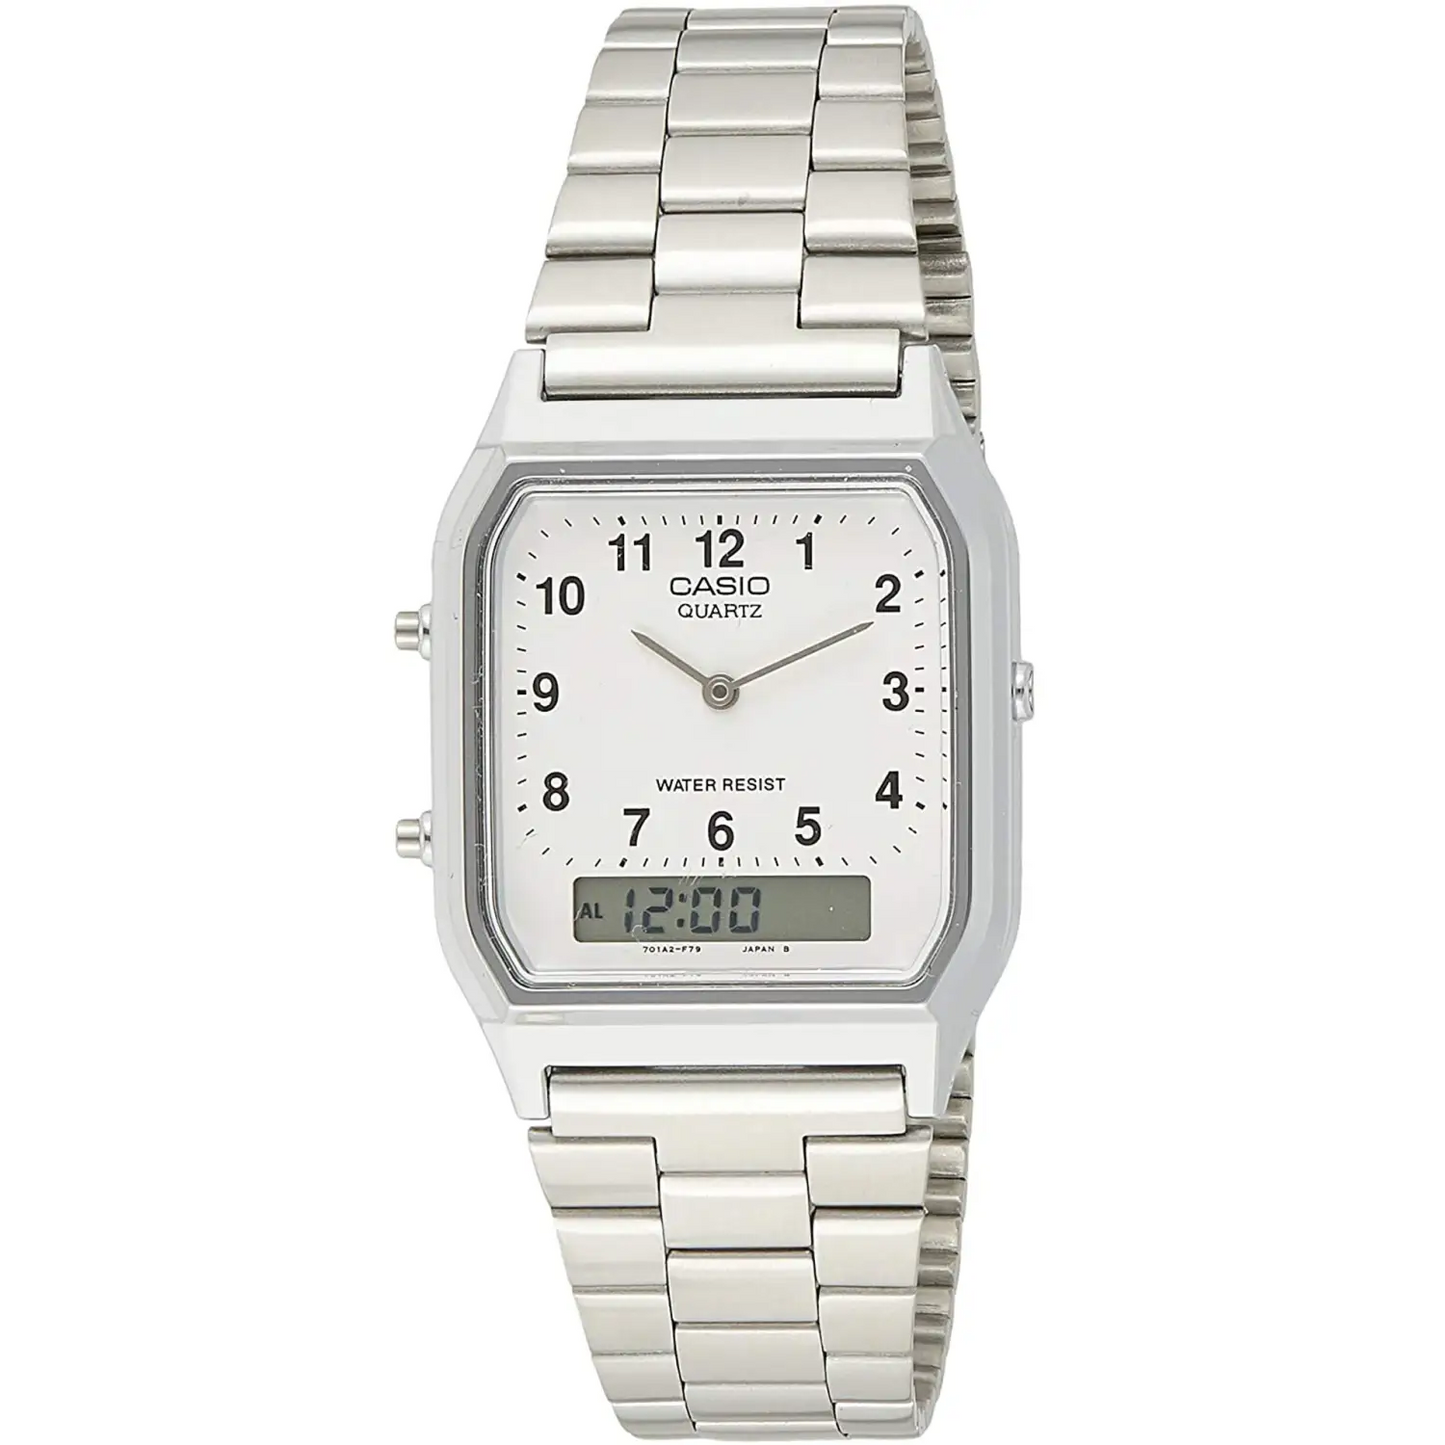 Casio Men’s Classic Stainless Steel Watch AQ230A-7B -